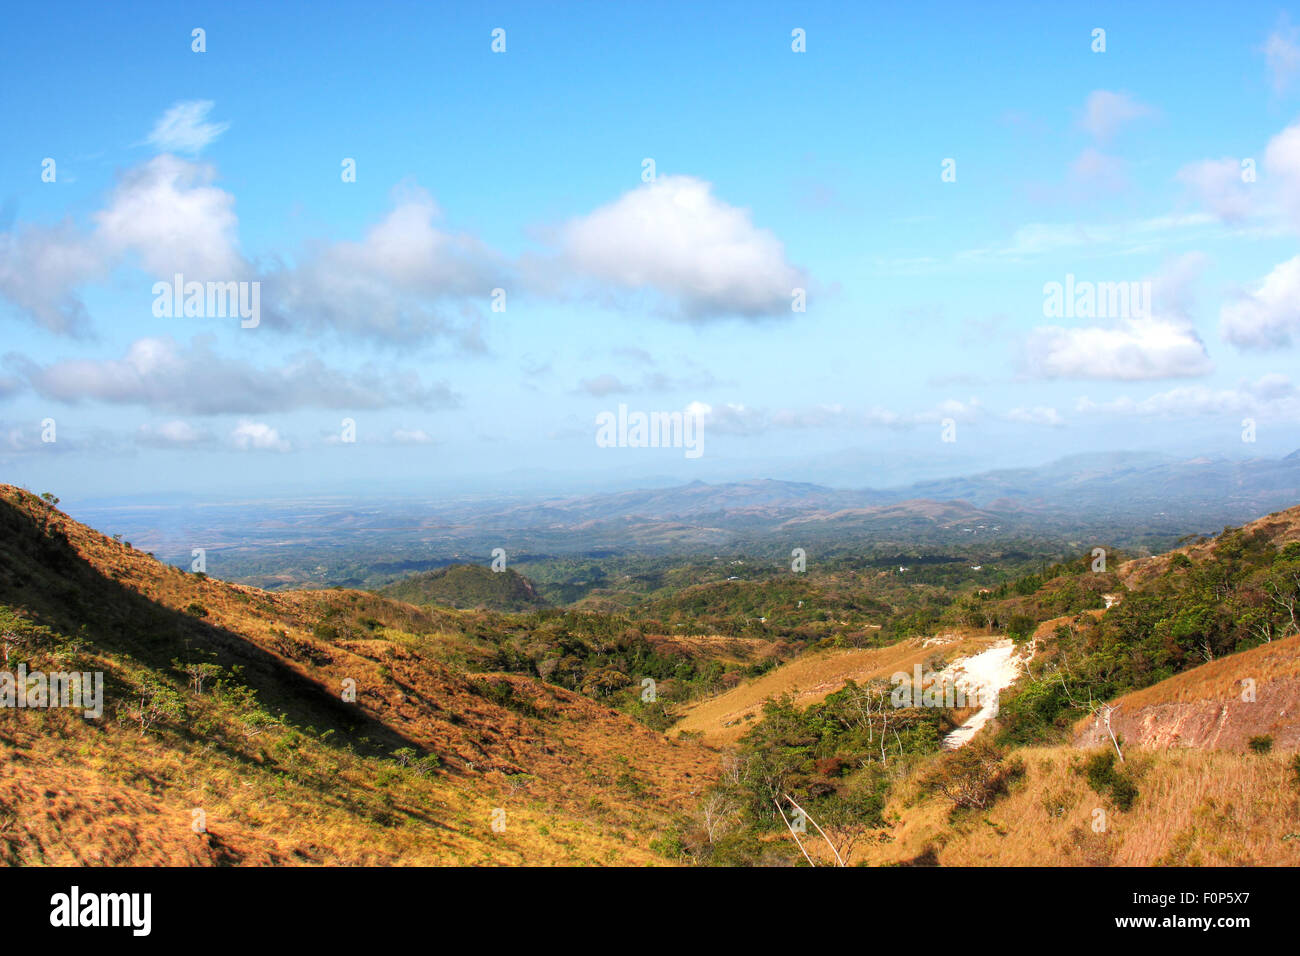 Panoramic view of El Valle de Anton in the mountains of Panama Stock Photo